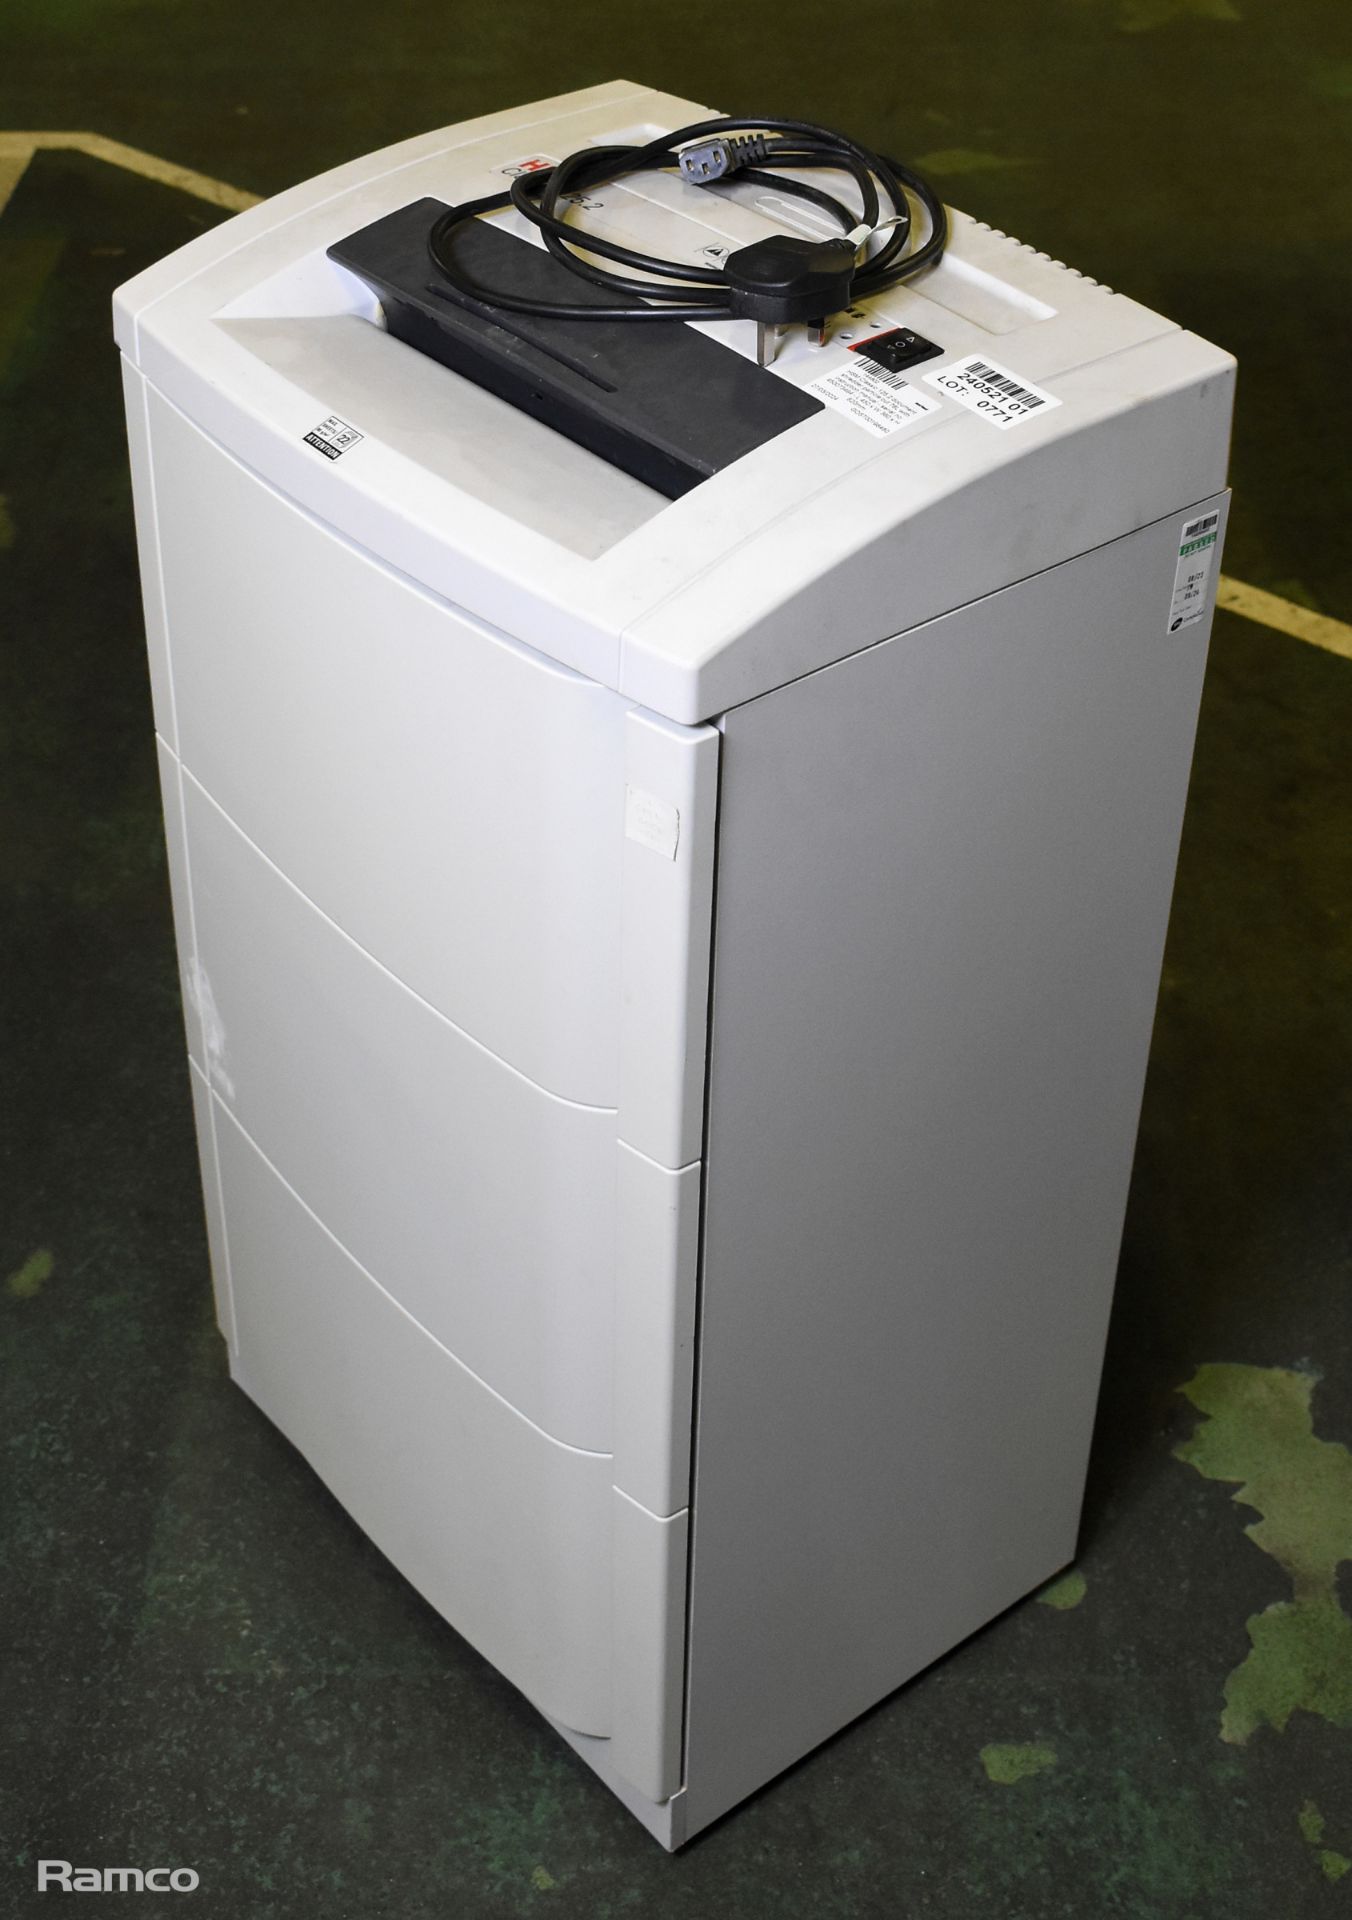 HSM Classic 125.2 document shredder - particle cut - 76L with instruction manual - serial no: 450073 - Image 2 of 8